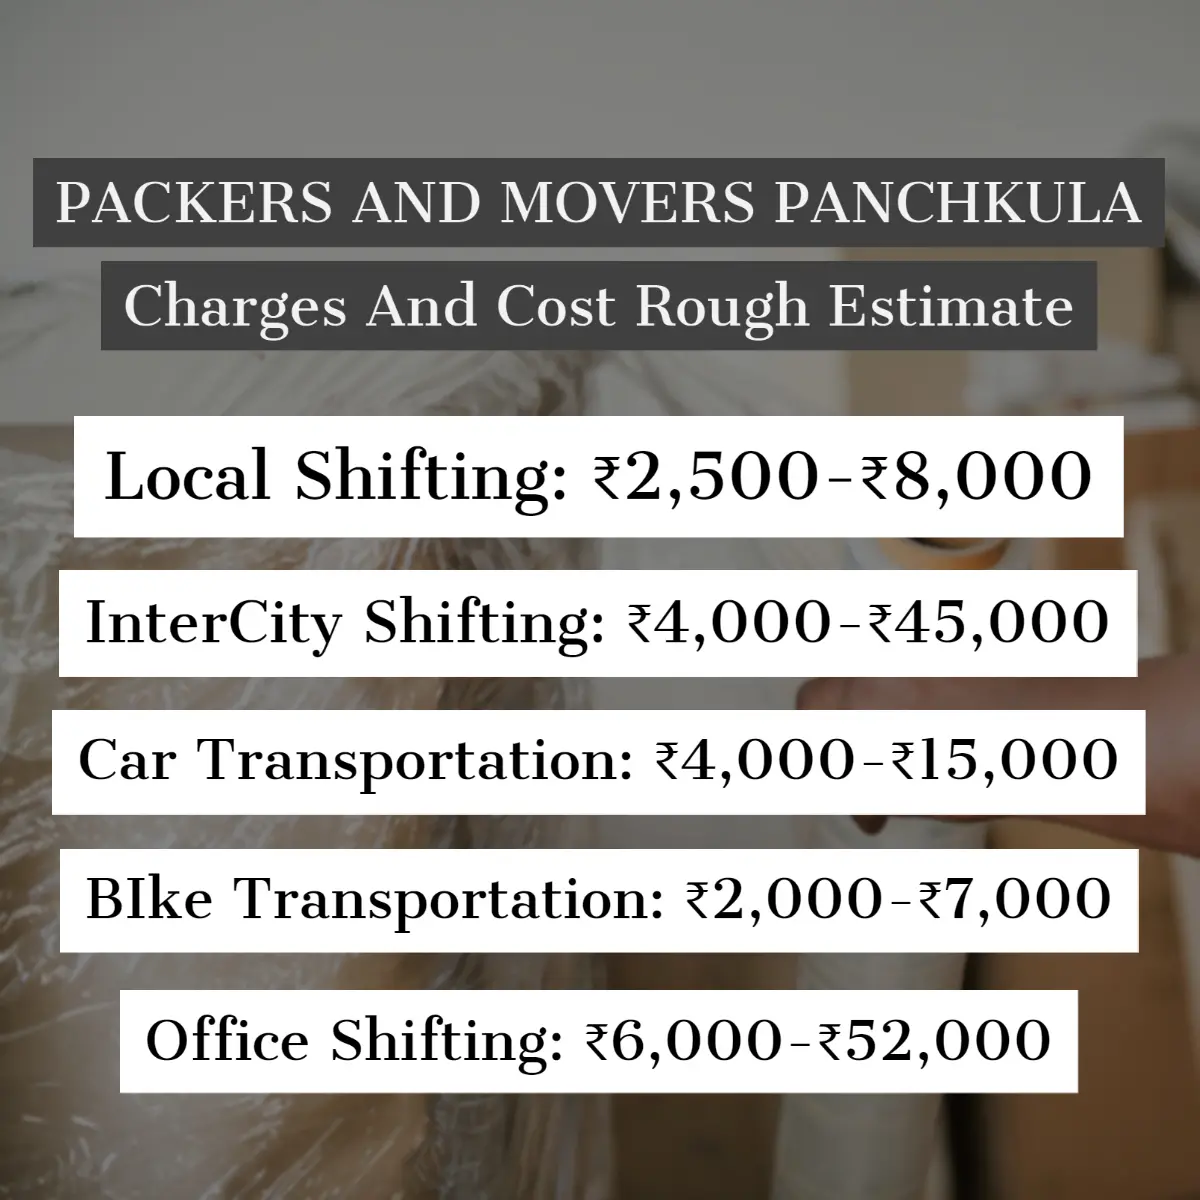 Packers and Movers Panchkula Charges